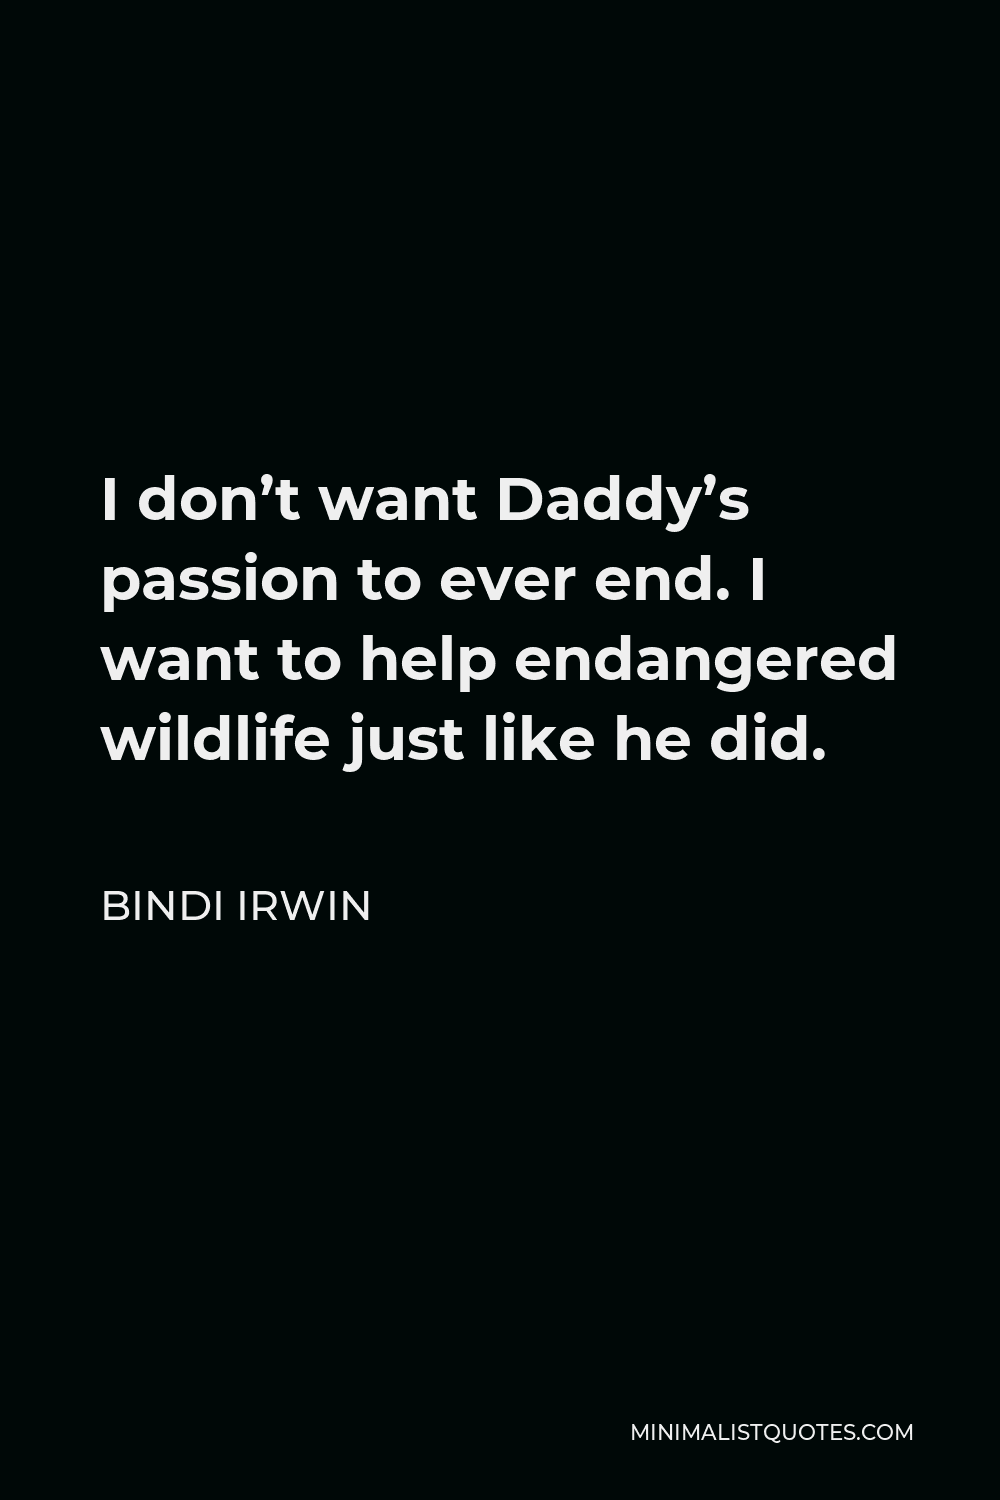 Bindi Irwin Quote - I don’t want Daddy’s passion to ever end. I want to help endangered wildlife just like he did.